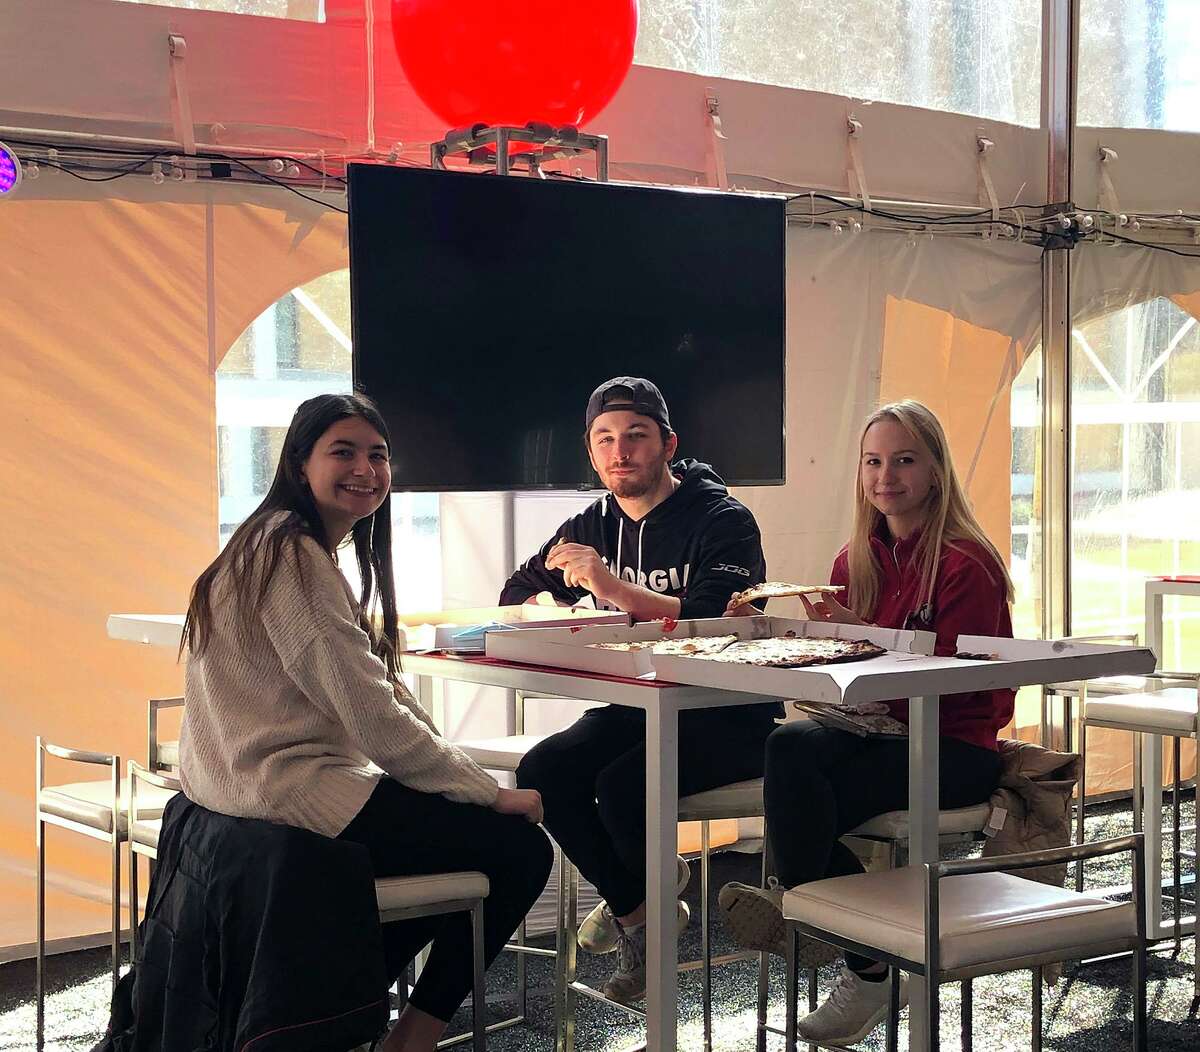 Sacred Heart University students gather in an outdoor tent with 3,500 square feet of space for them to socialize as the school relaxes some of its COVID restrictions.